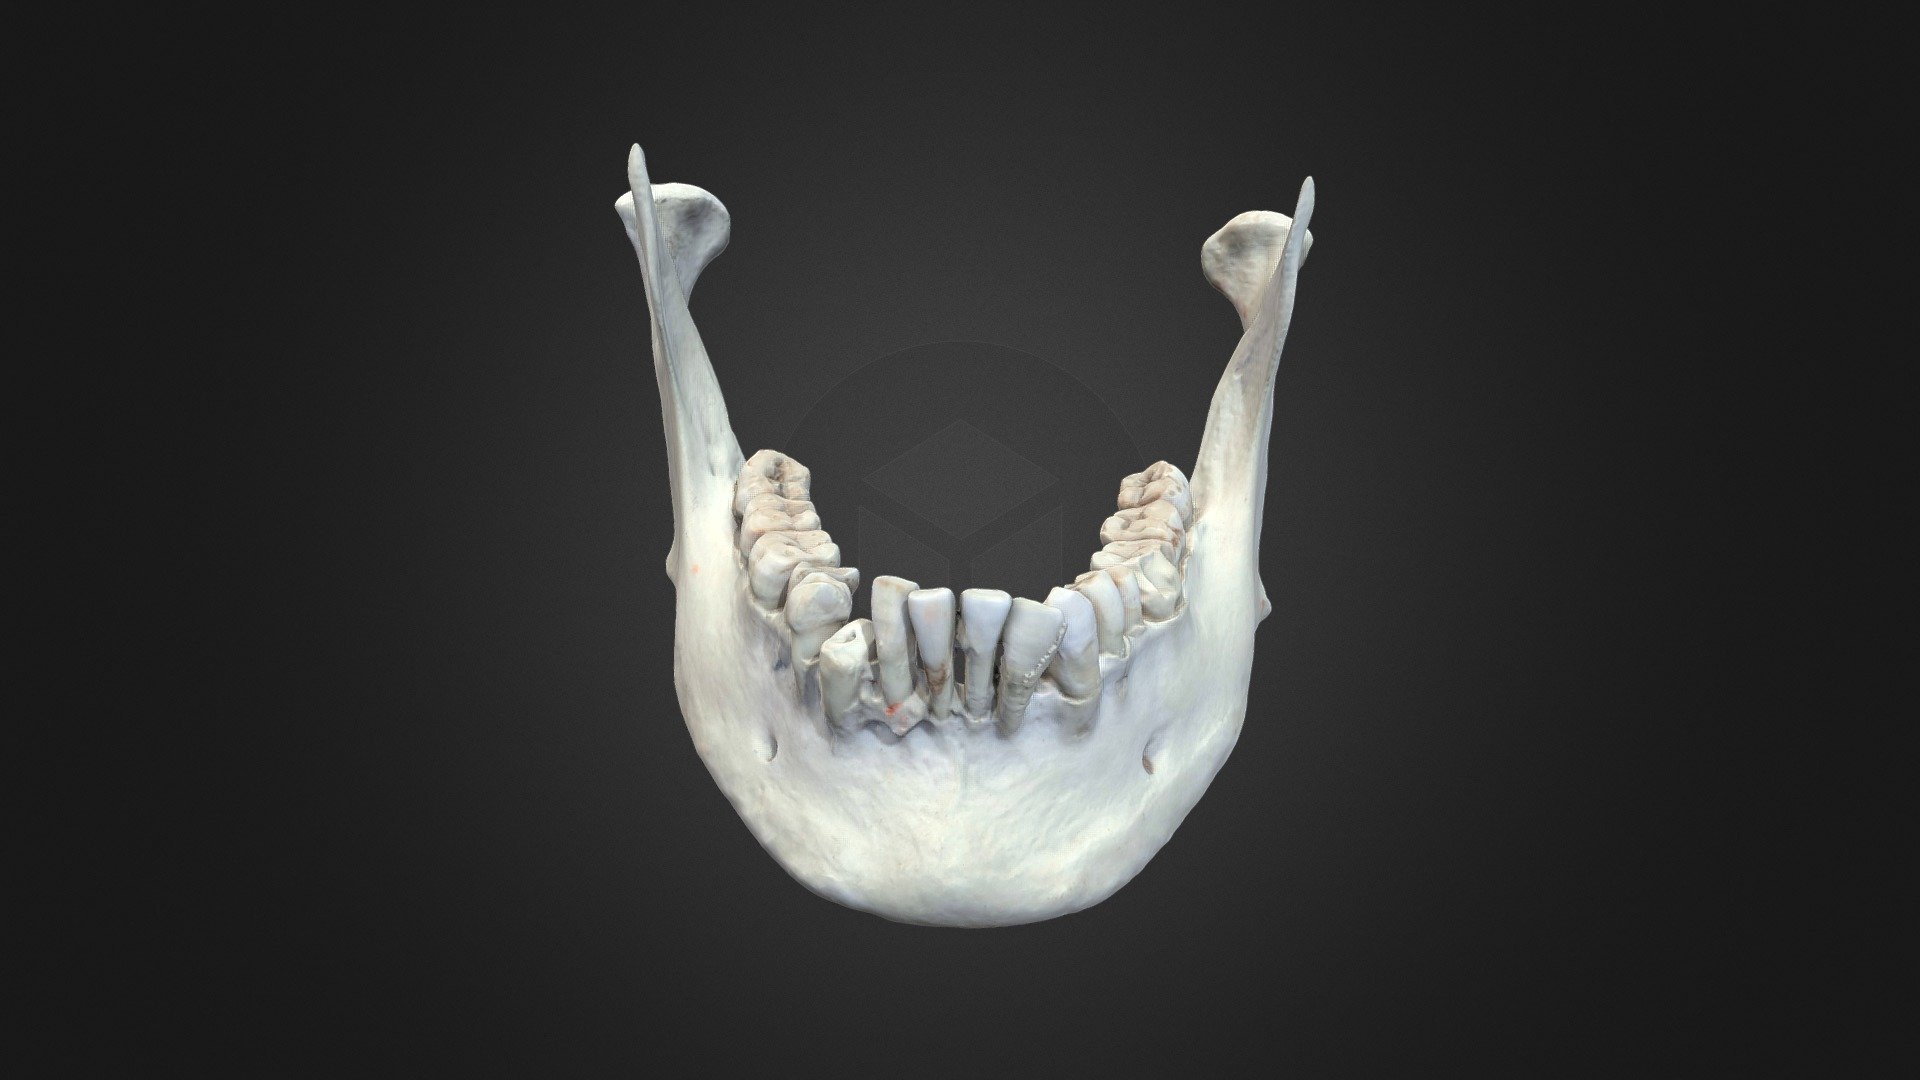 A human mandible (lower jaw) bone. 

For more on the head and neck region, visit: https://clinicalanatomy.ca/head.html 

Produced by the HIVE at the University of British Columbia. 

Credits: 

-Dr. Claudia Krebs (Faculty Lead) 

-Ishan Dixit 

-Connor Dunne  

-Monika Fejtek 
 - Human Mandible - 3D model by UBC Medicine - Educational Media 3d model